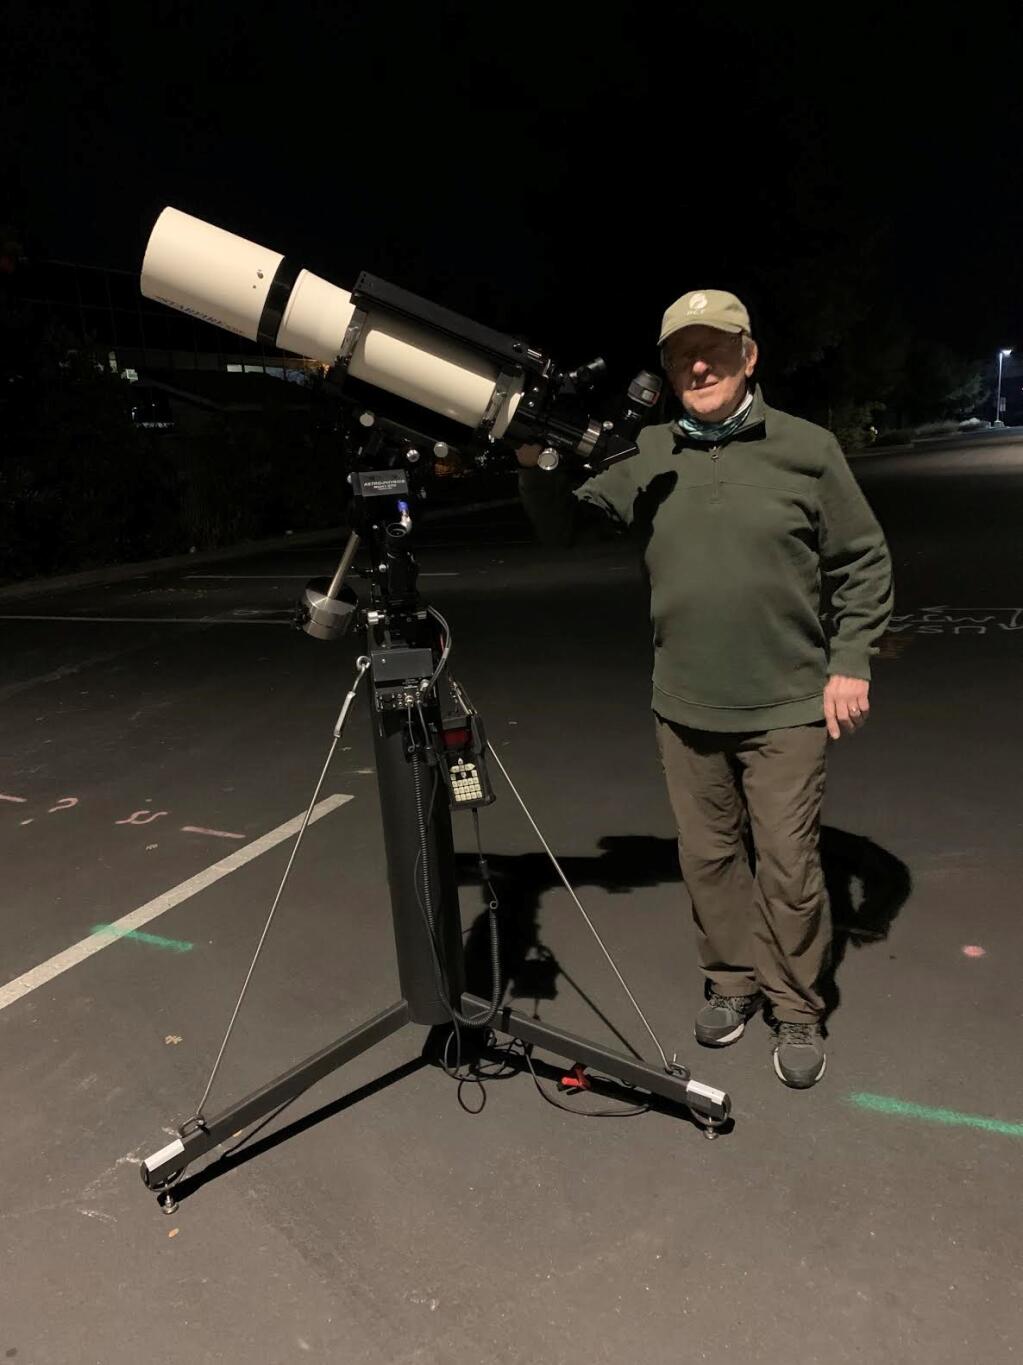 Len Nelson with his 133 mm refractor telescope, taken by Nelson on a recent evening.